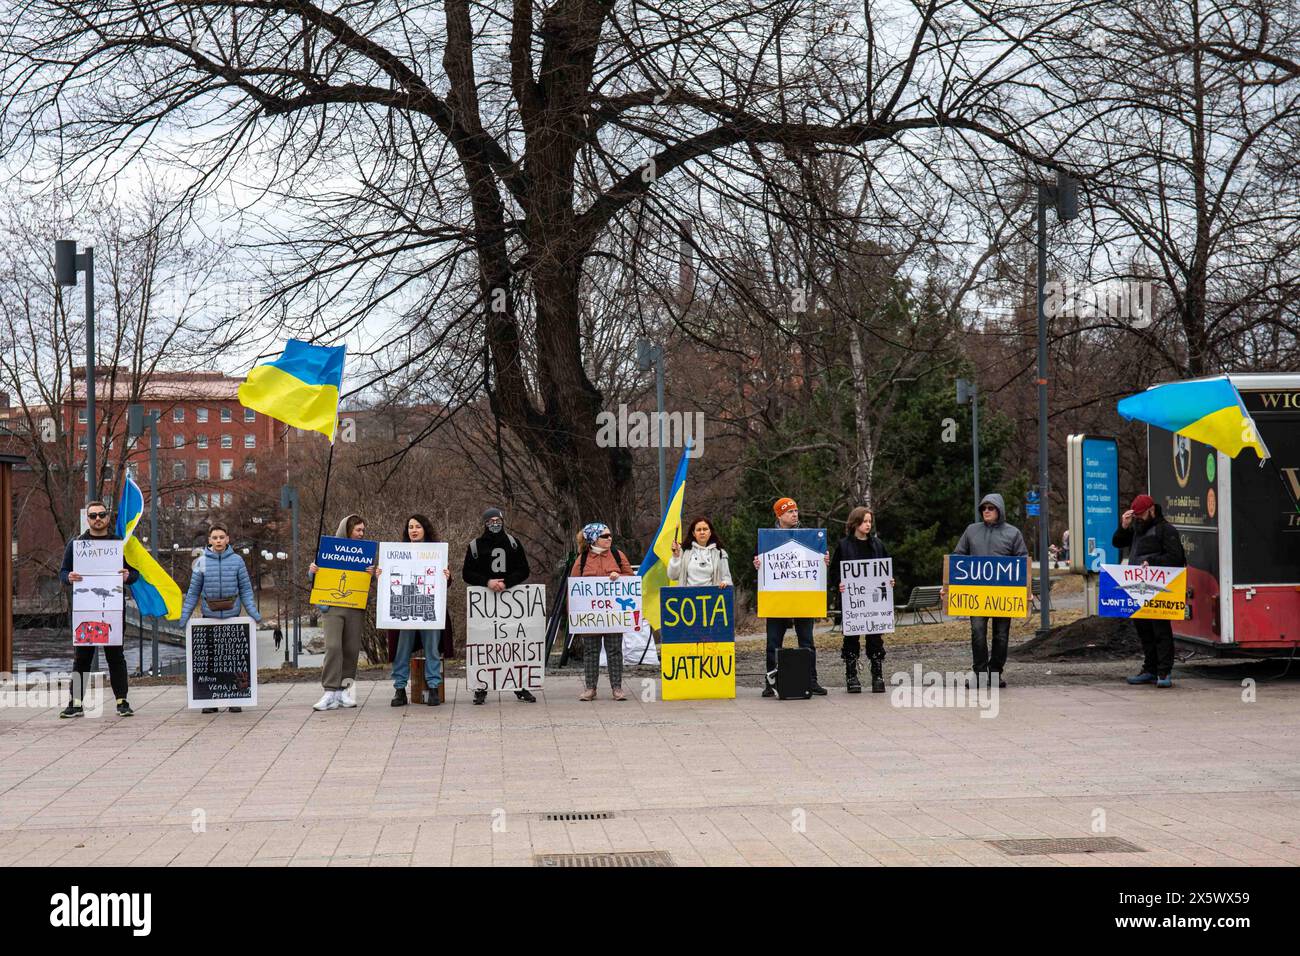 Ukrainian demonstrators protesting against Russian invasion in Tampere, Finland Stock Photo